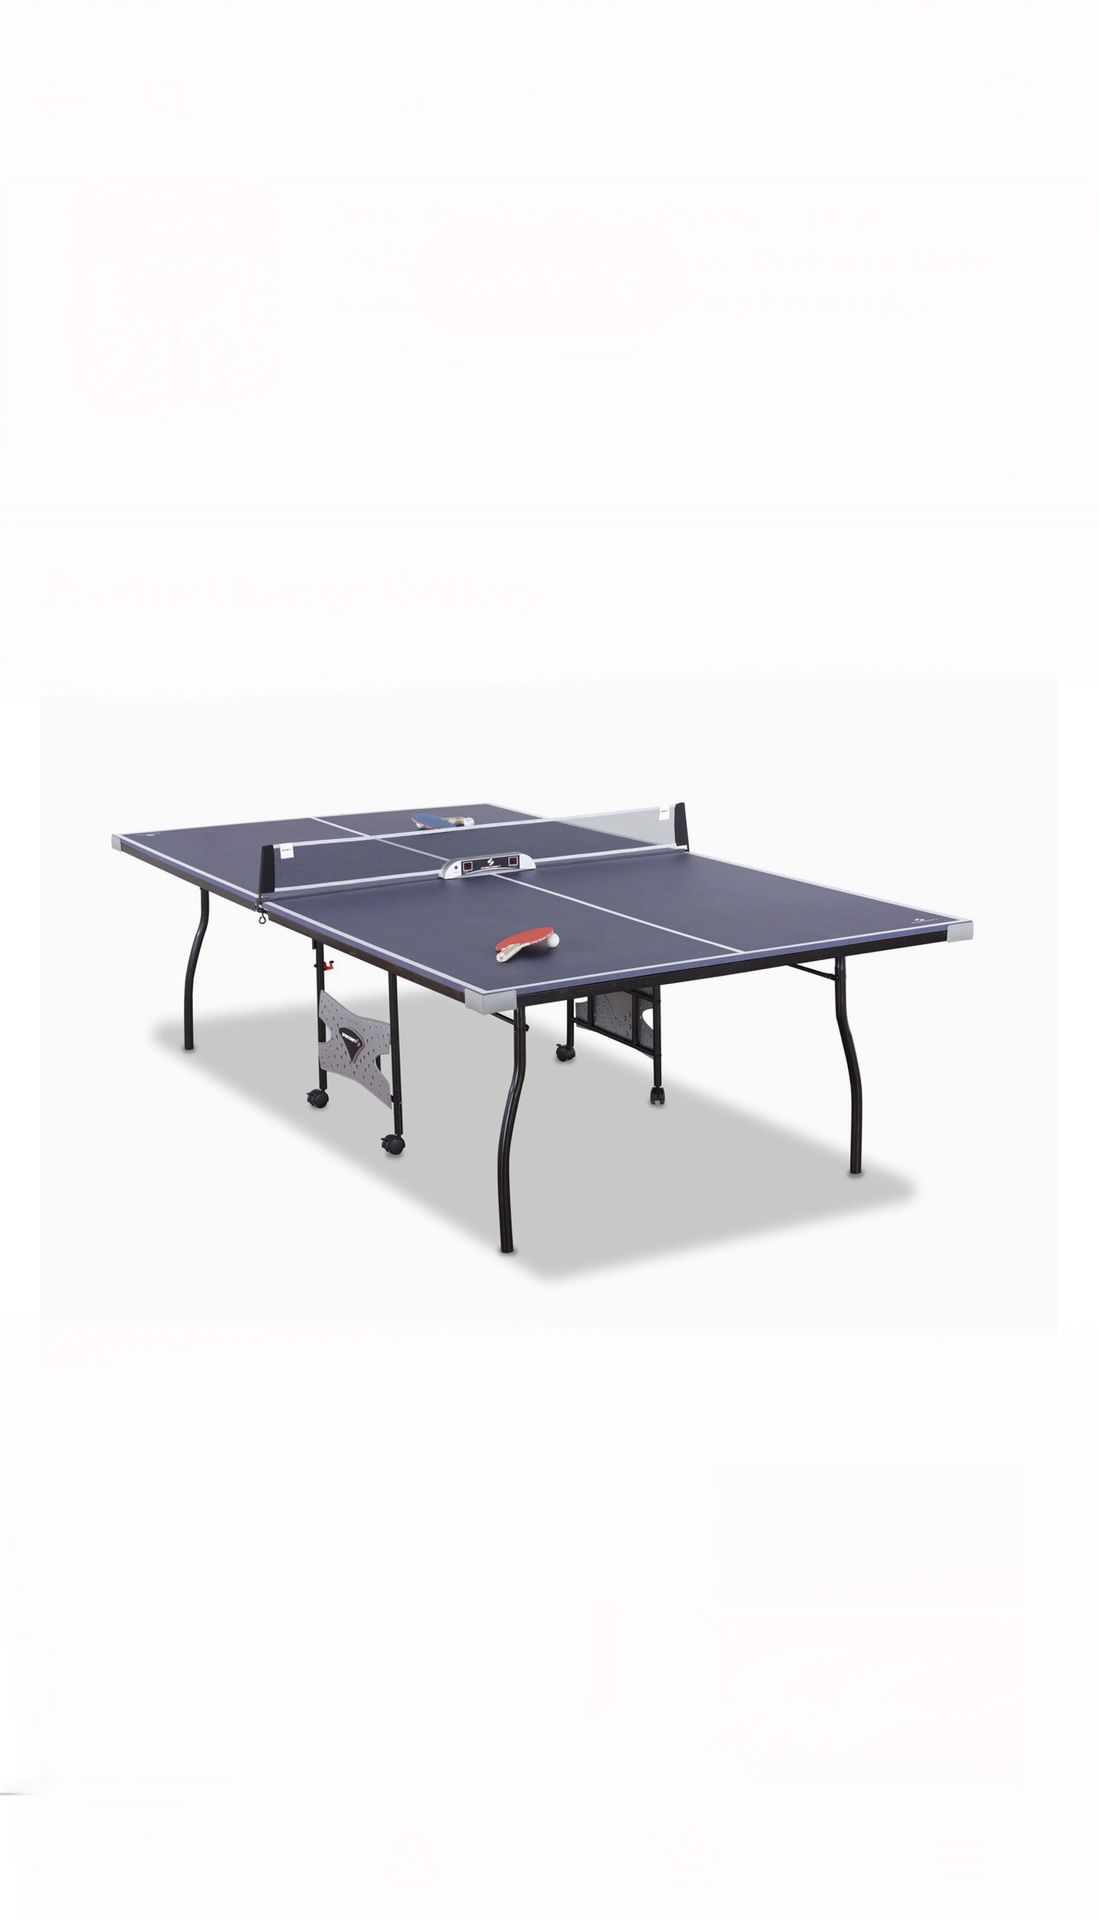 Blue Sportcraft Ping Pong Table